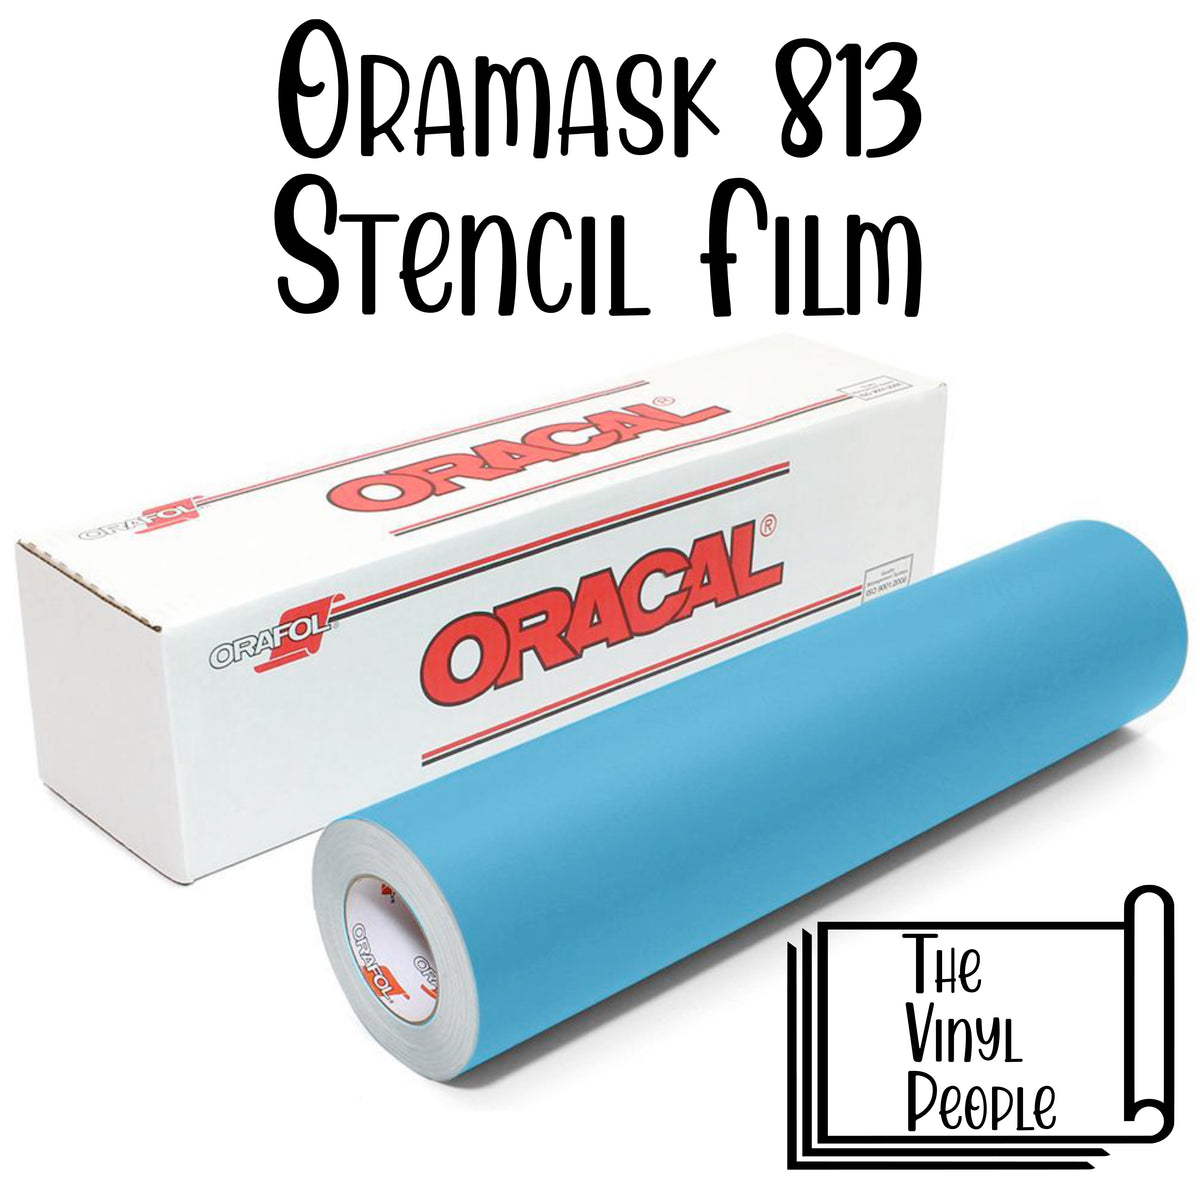 Oramask 813 Stencil Film – TheVinylPeople